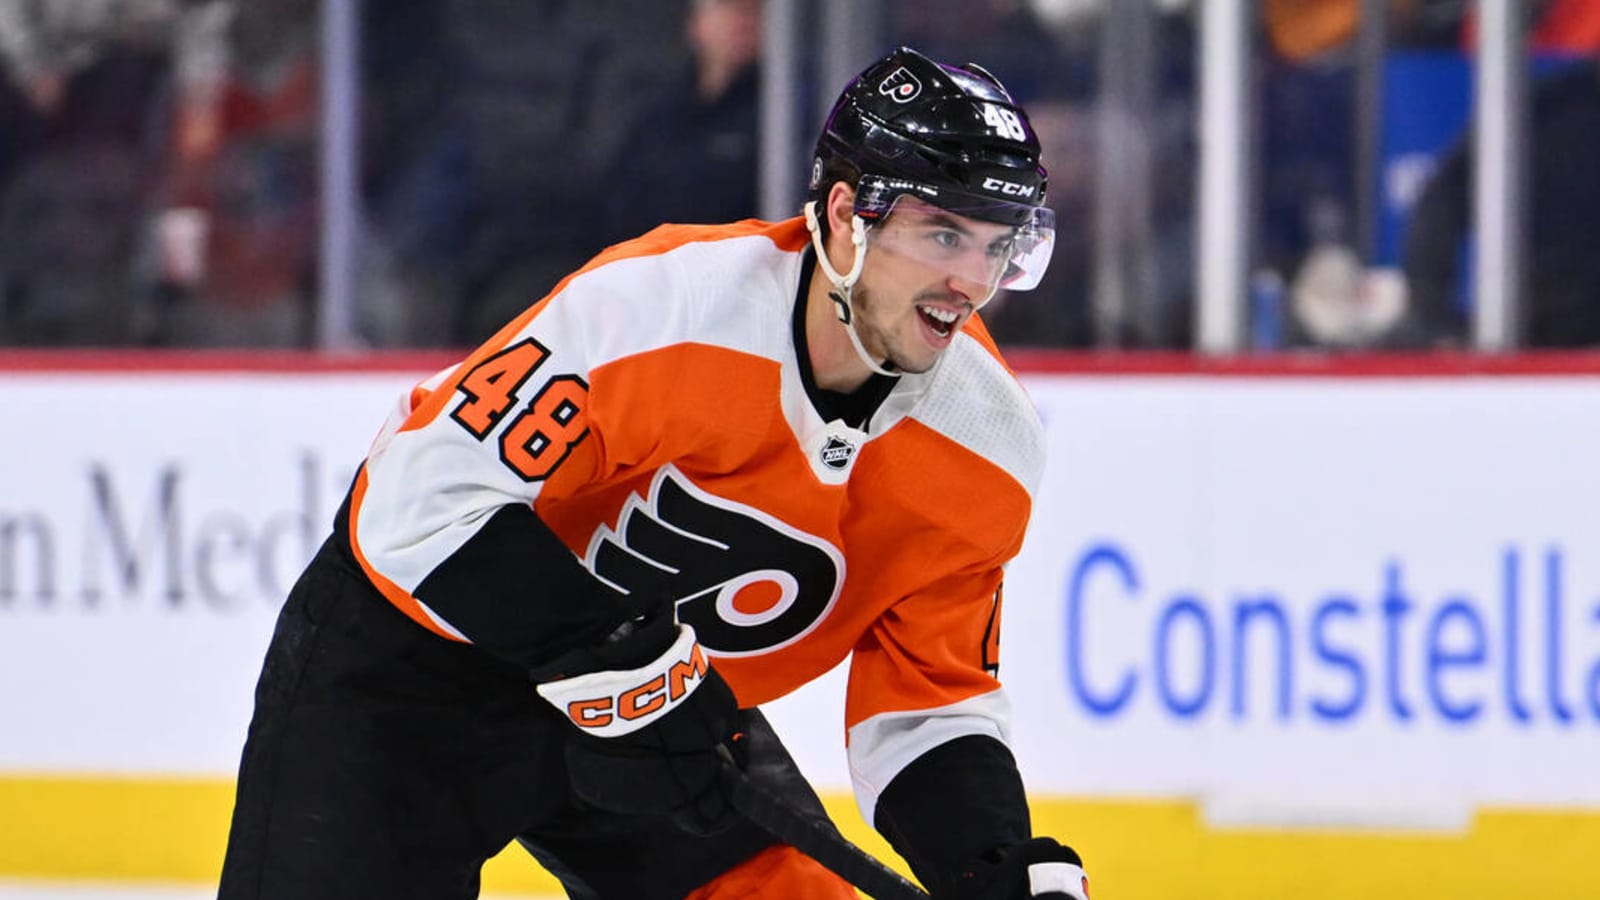 Report: Flyers not looking to trade former first-round pick despite healthy scratches